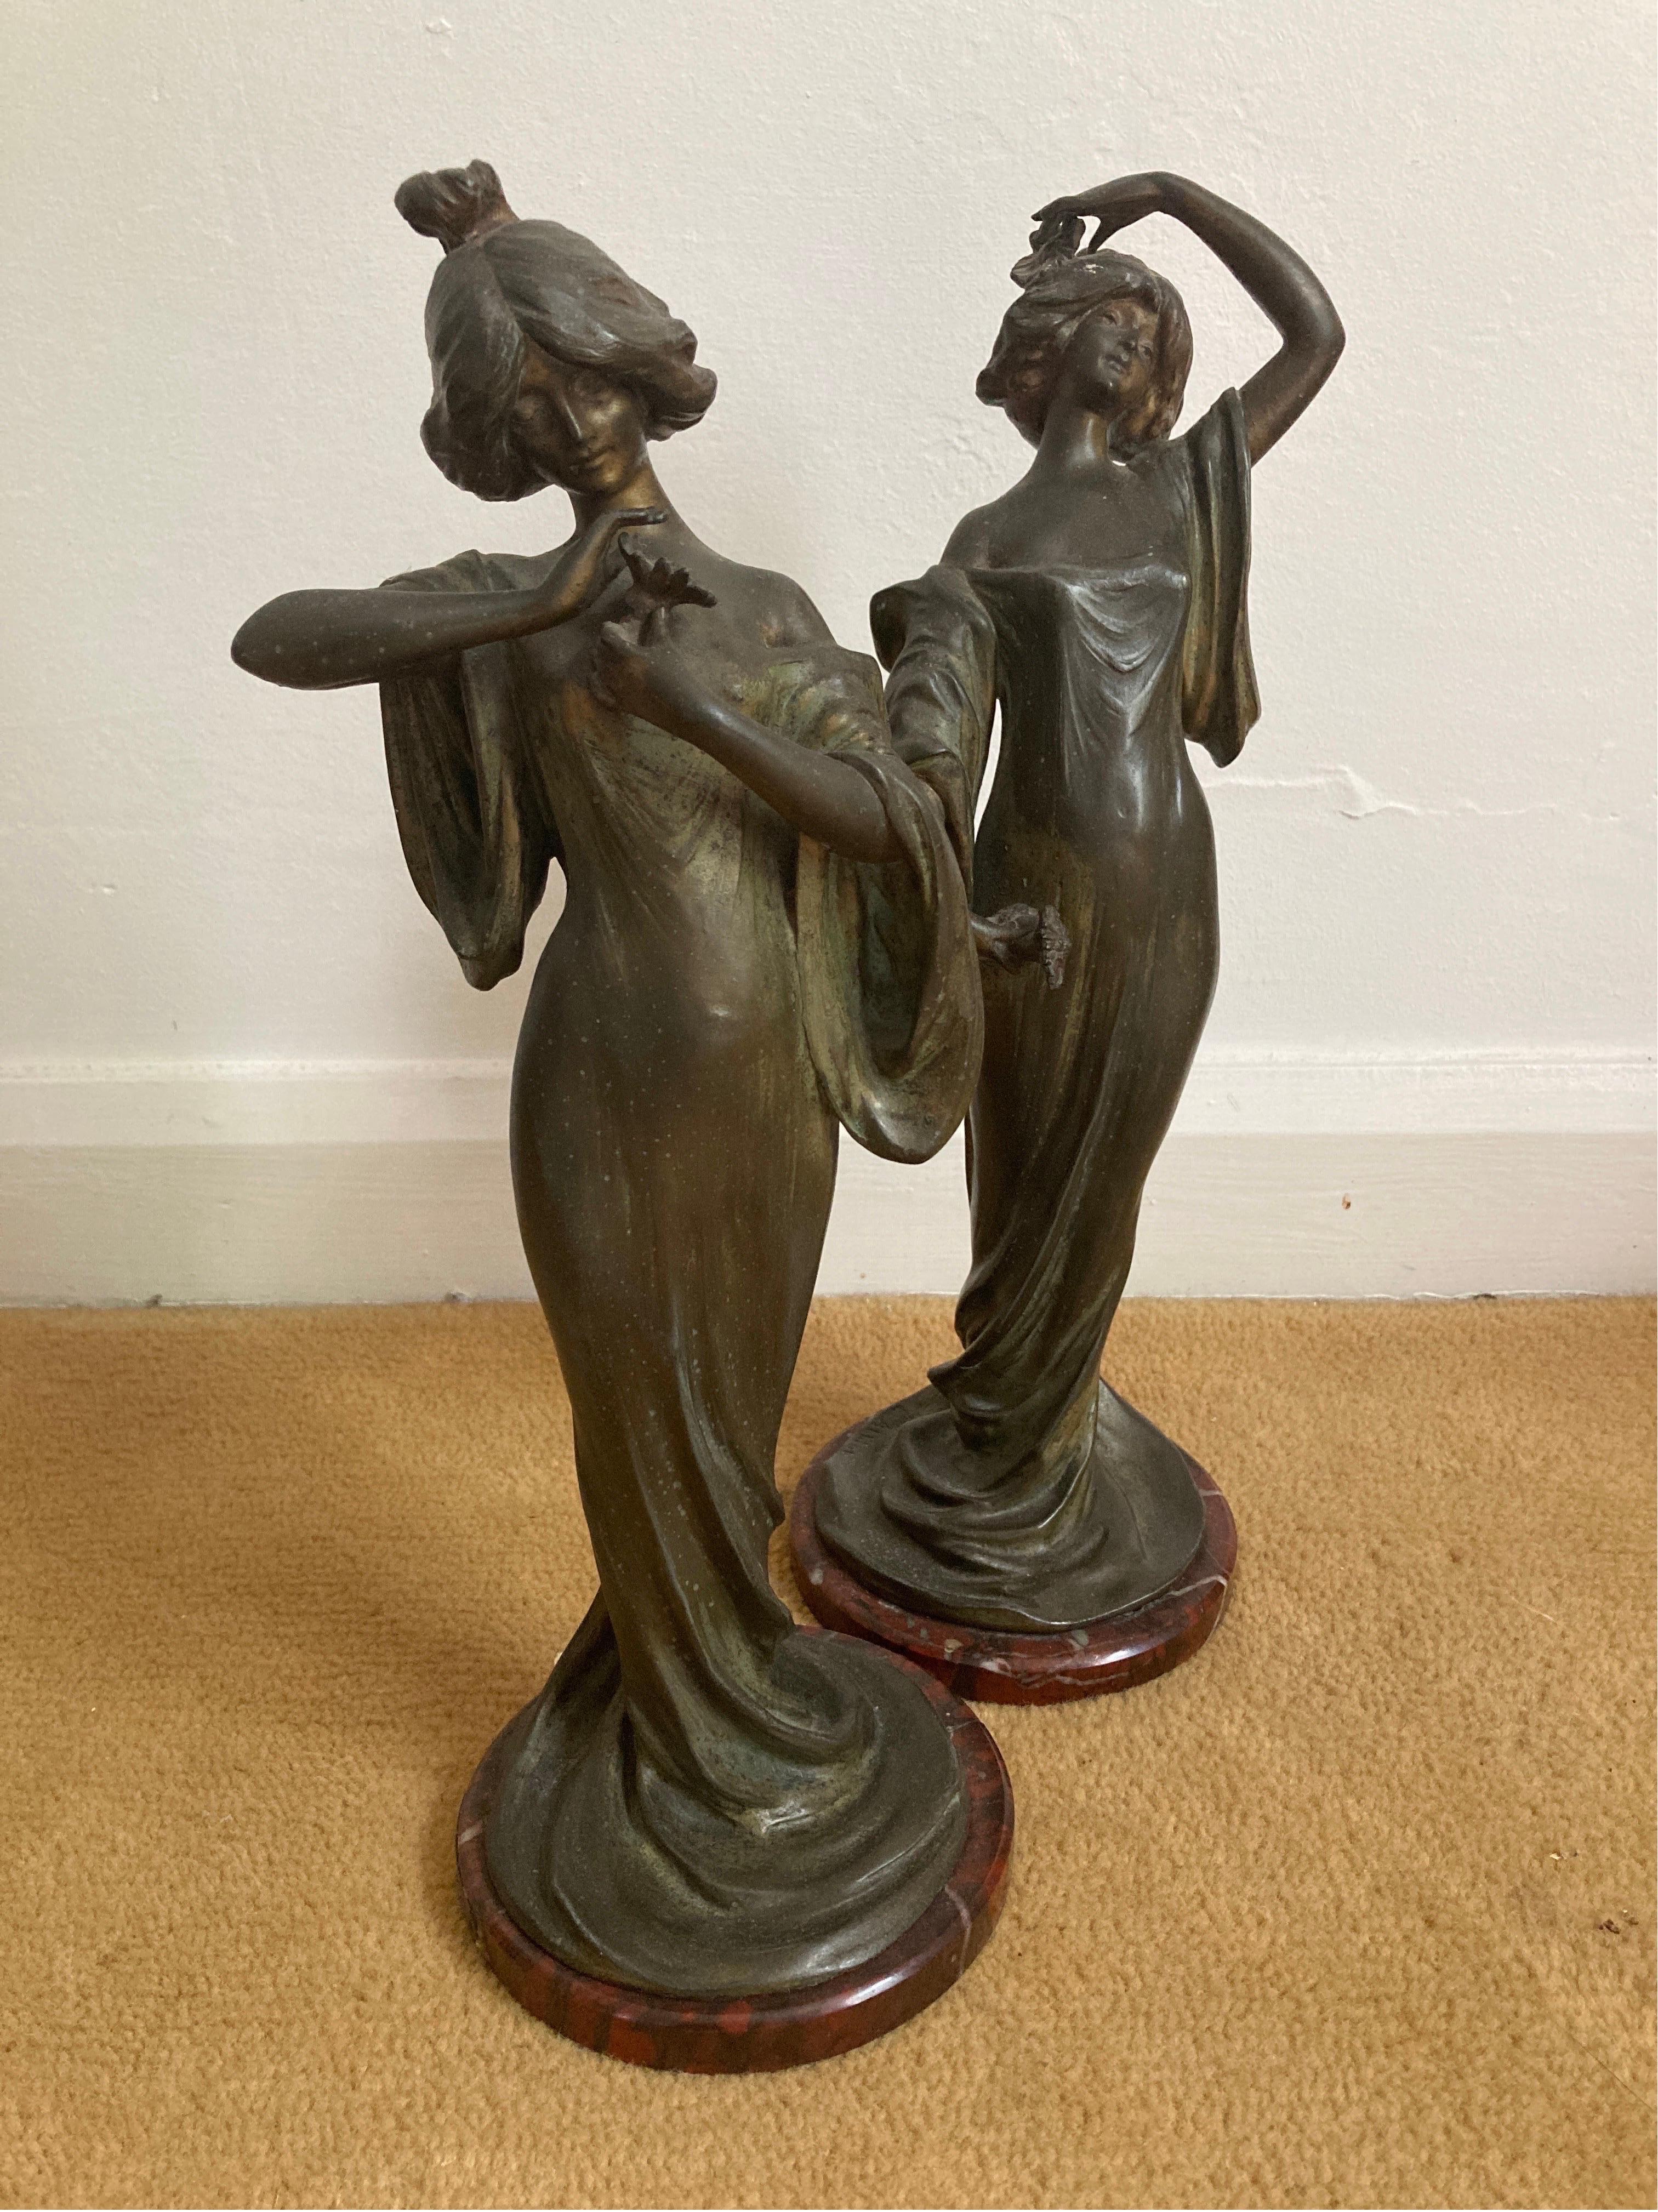 Two signed L.Alliot bronze Art Nouveau figural sculptures of standing beauties. Each on rouge marble bases with plaques. Marked Edelweiss, Par . L . Alliot.